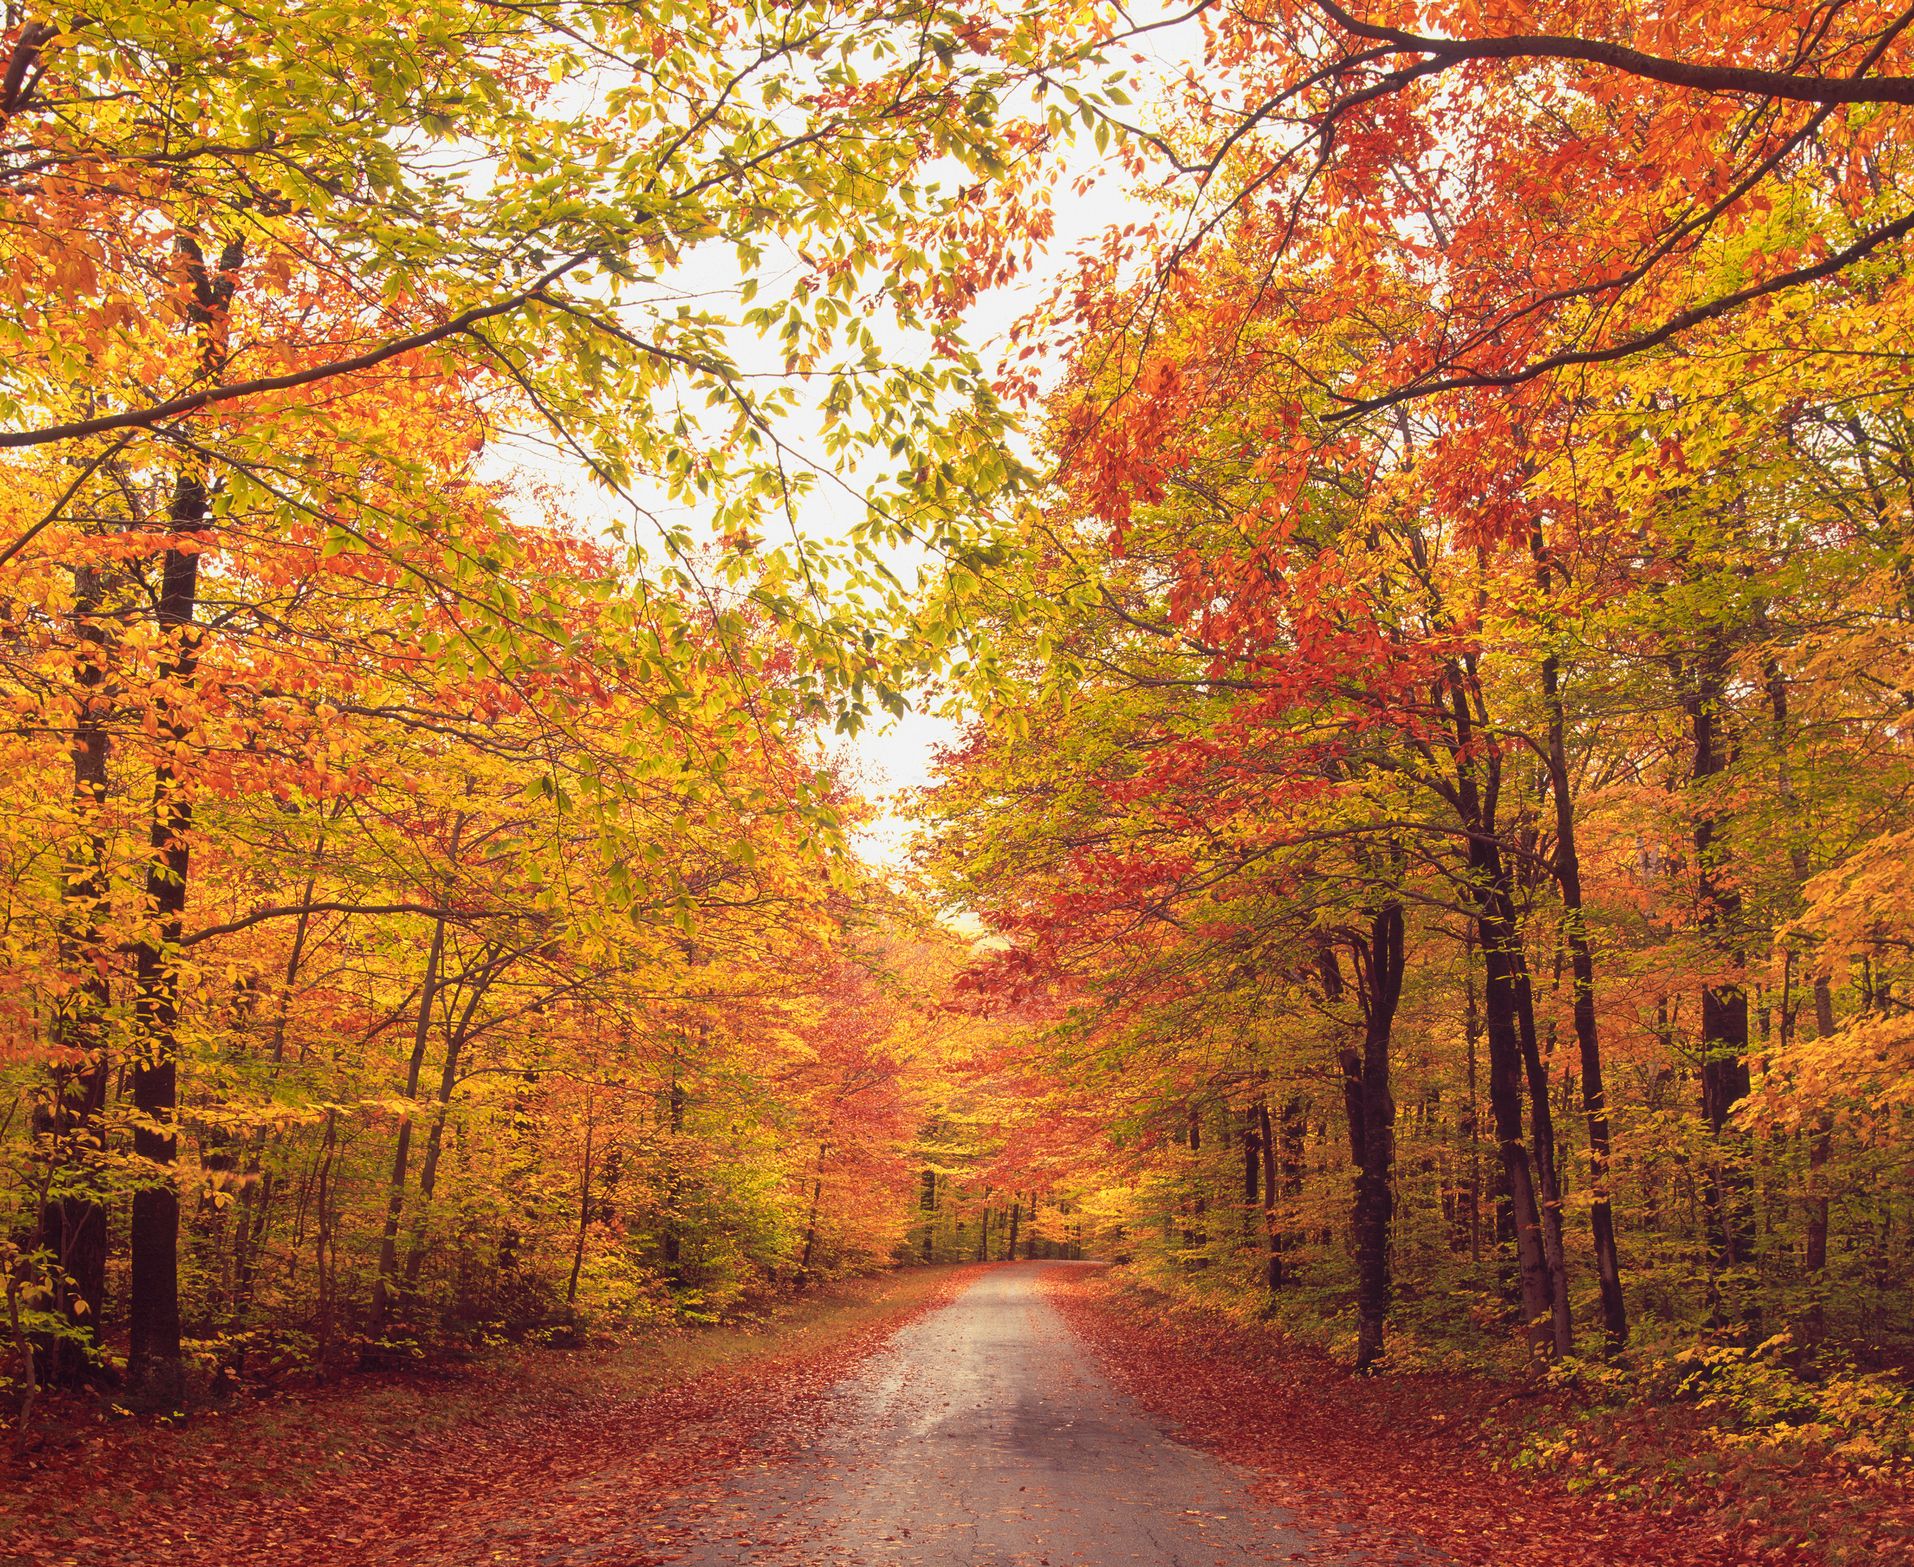 West Virginia's fall foliage map released